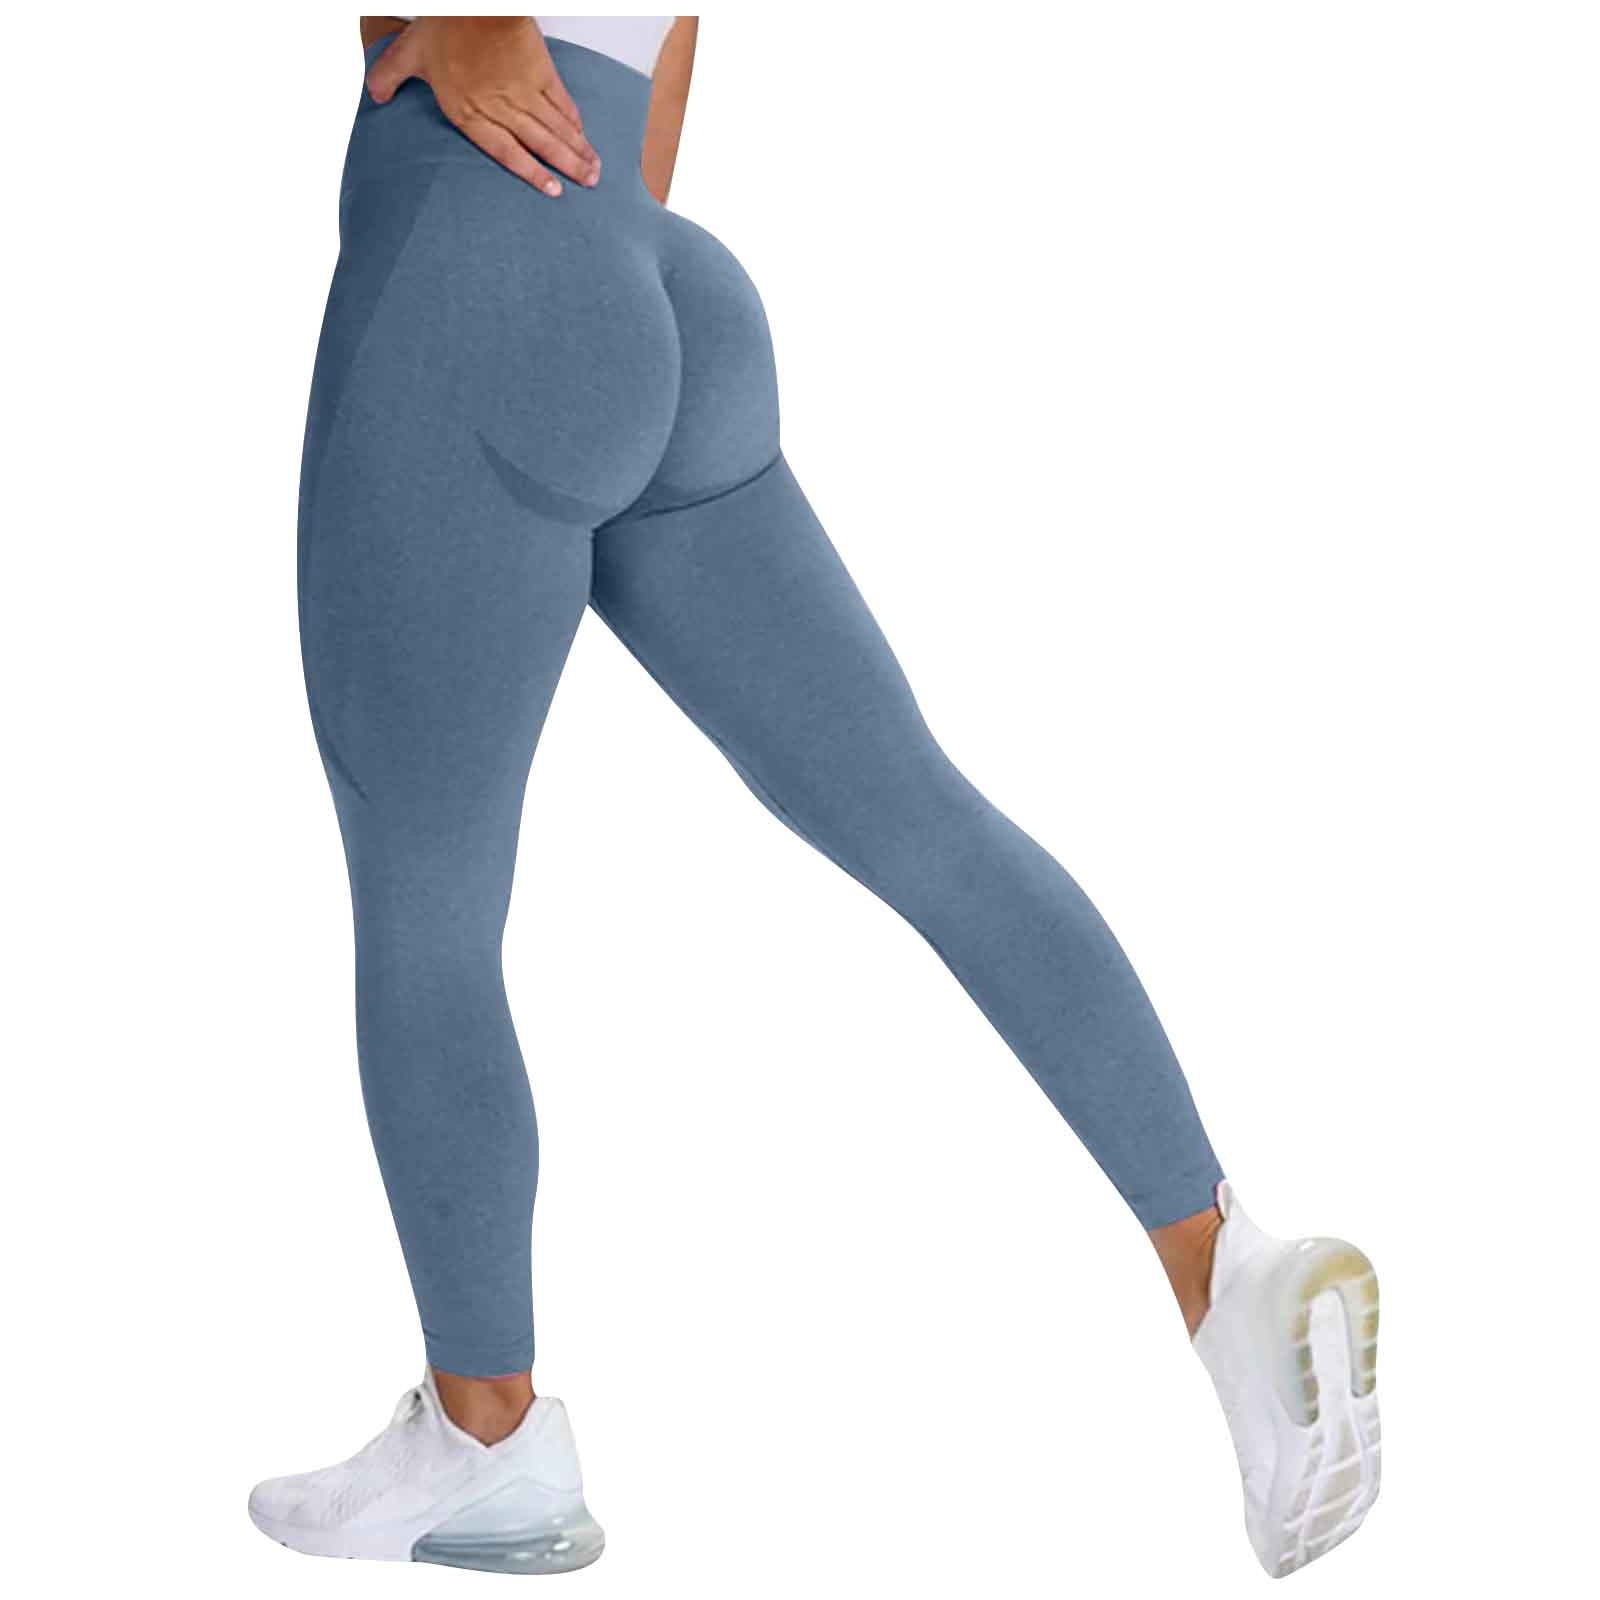 Details about   Women Butt Lift Yoga Pants High Waist Leggings Ruched Workout Seamless Trousers 